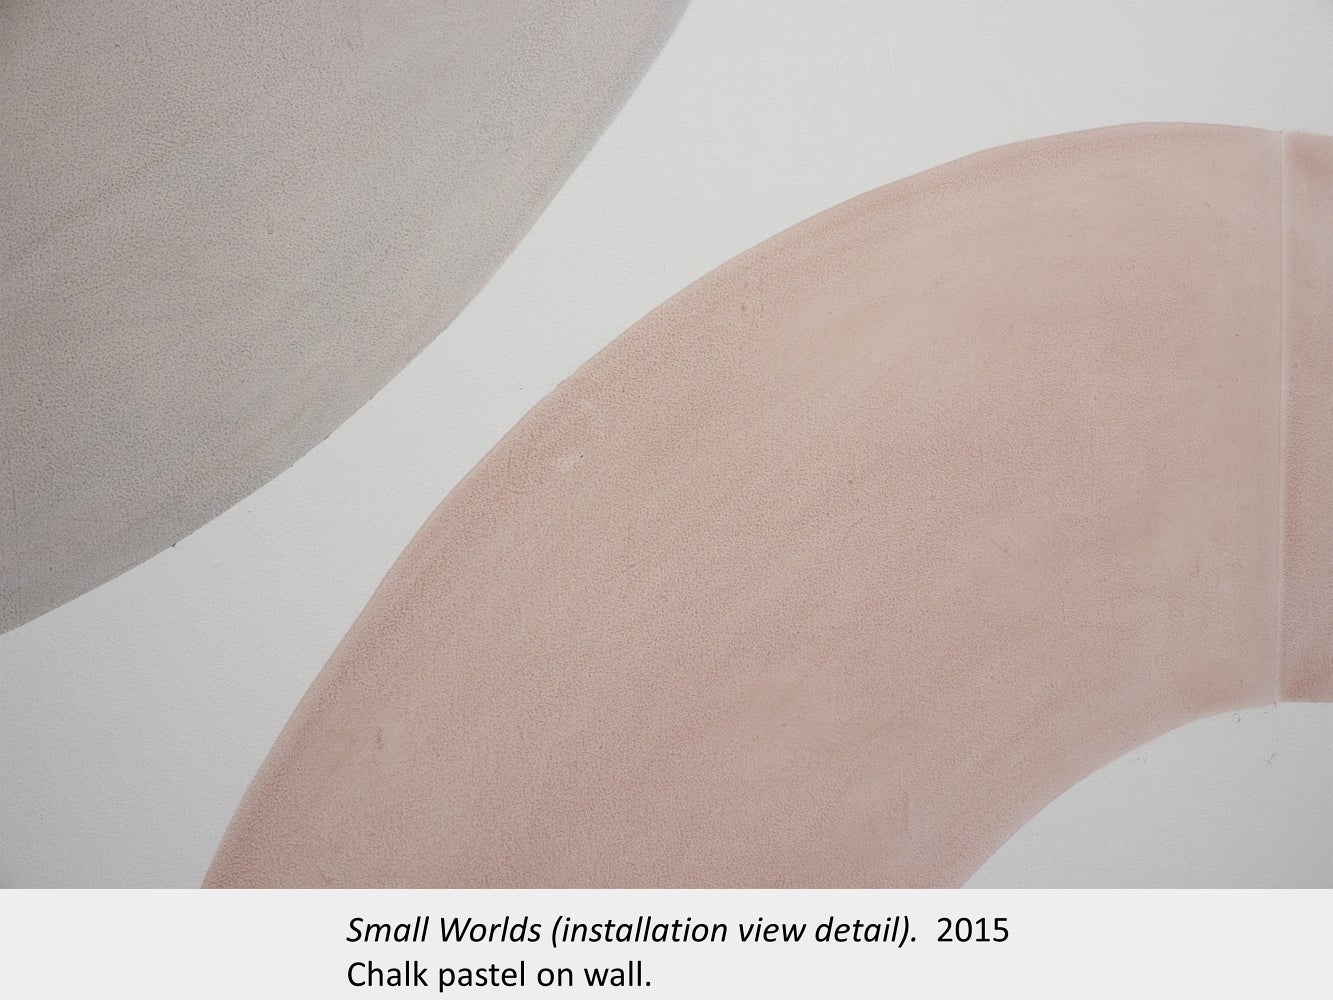 Artwork by Liz Little. Small Worlds (installation detail view). 2015. Chalk pastel on wall.